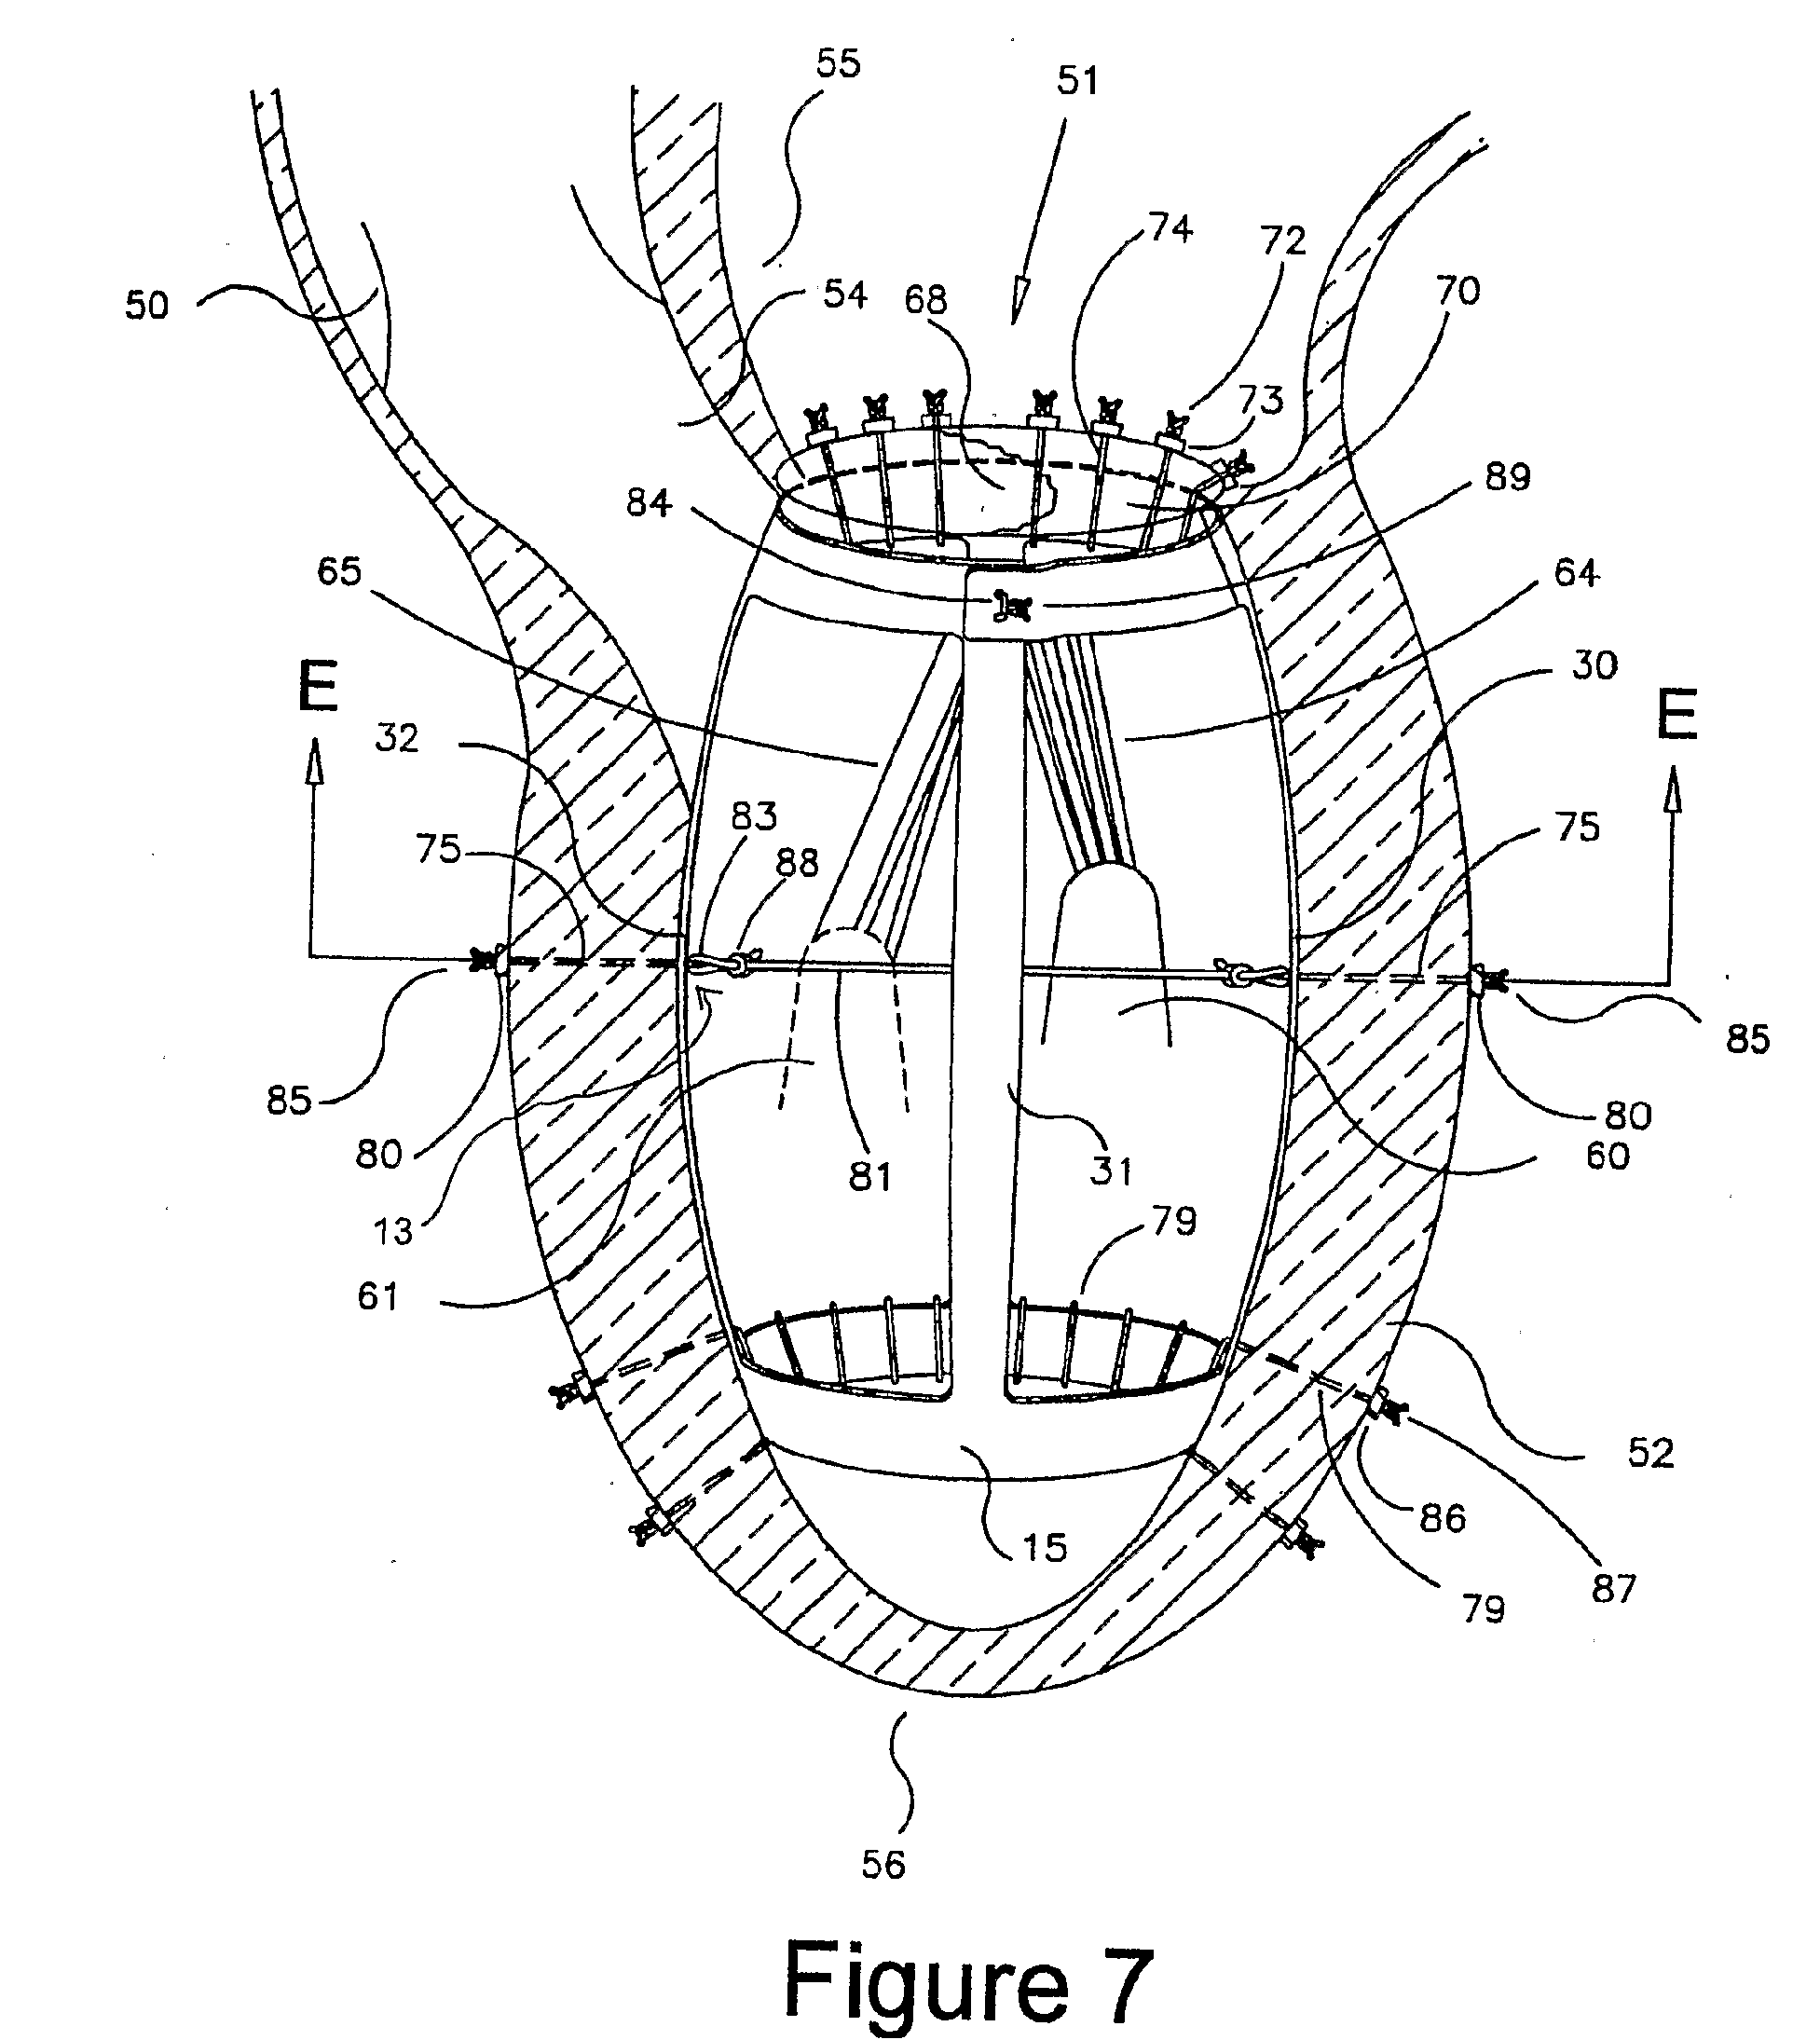 Method and Apparaus for the Surgical Treatment of Congestive Heart Failure